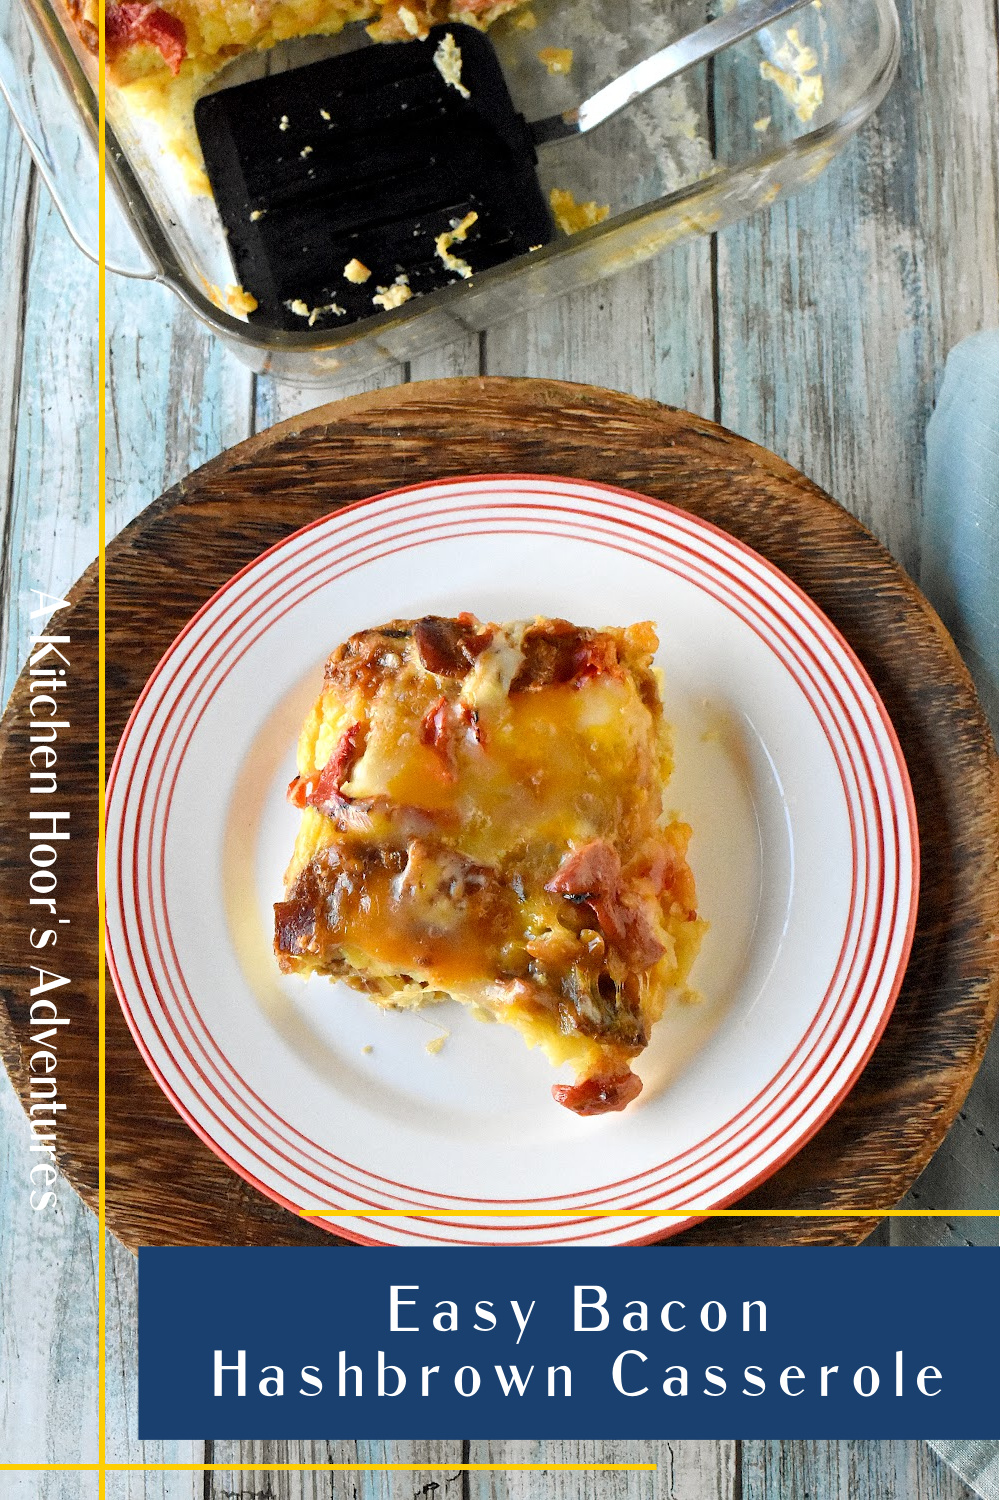 Turn your brunch game up a notch with this Easy Bacon Hashbrown Casserole. Trust us, your taste buds will thank you. #BaconLoversDelight #BreakfastCasseroleGoals #EasyBreakfastRecipes #HashbrownHeaven #ComfortFoodCravings